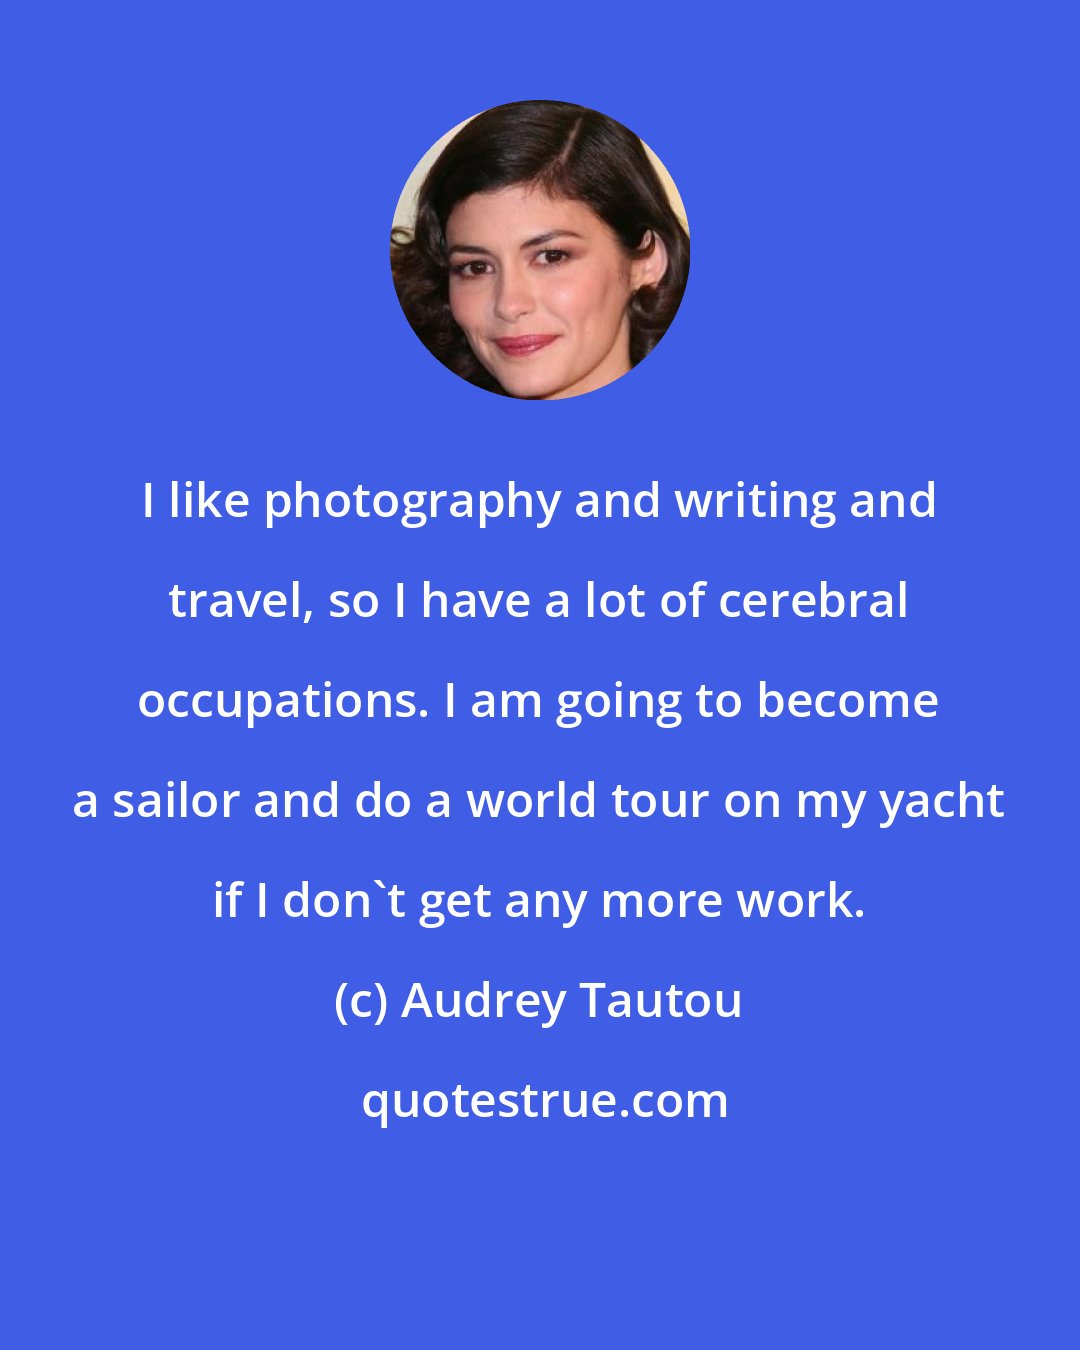 Audrey Tautou: I like photography and writing and travel, so I have a lot of cerebral occupations. I am going to become a sailor and do a world tour on my yacht if I don't get any more work.